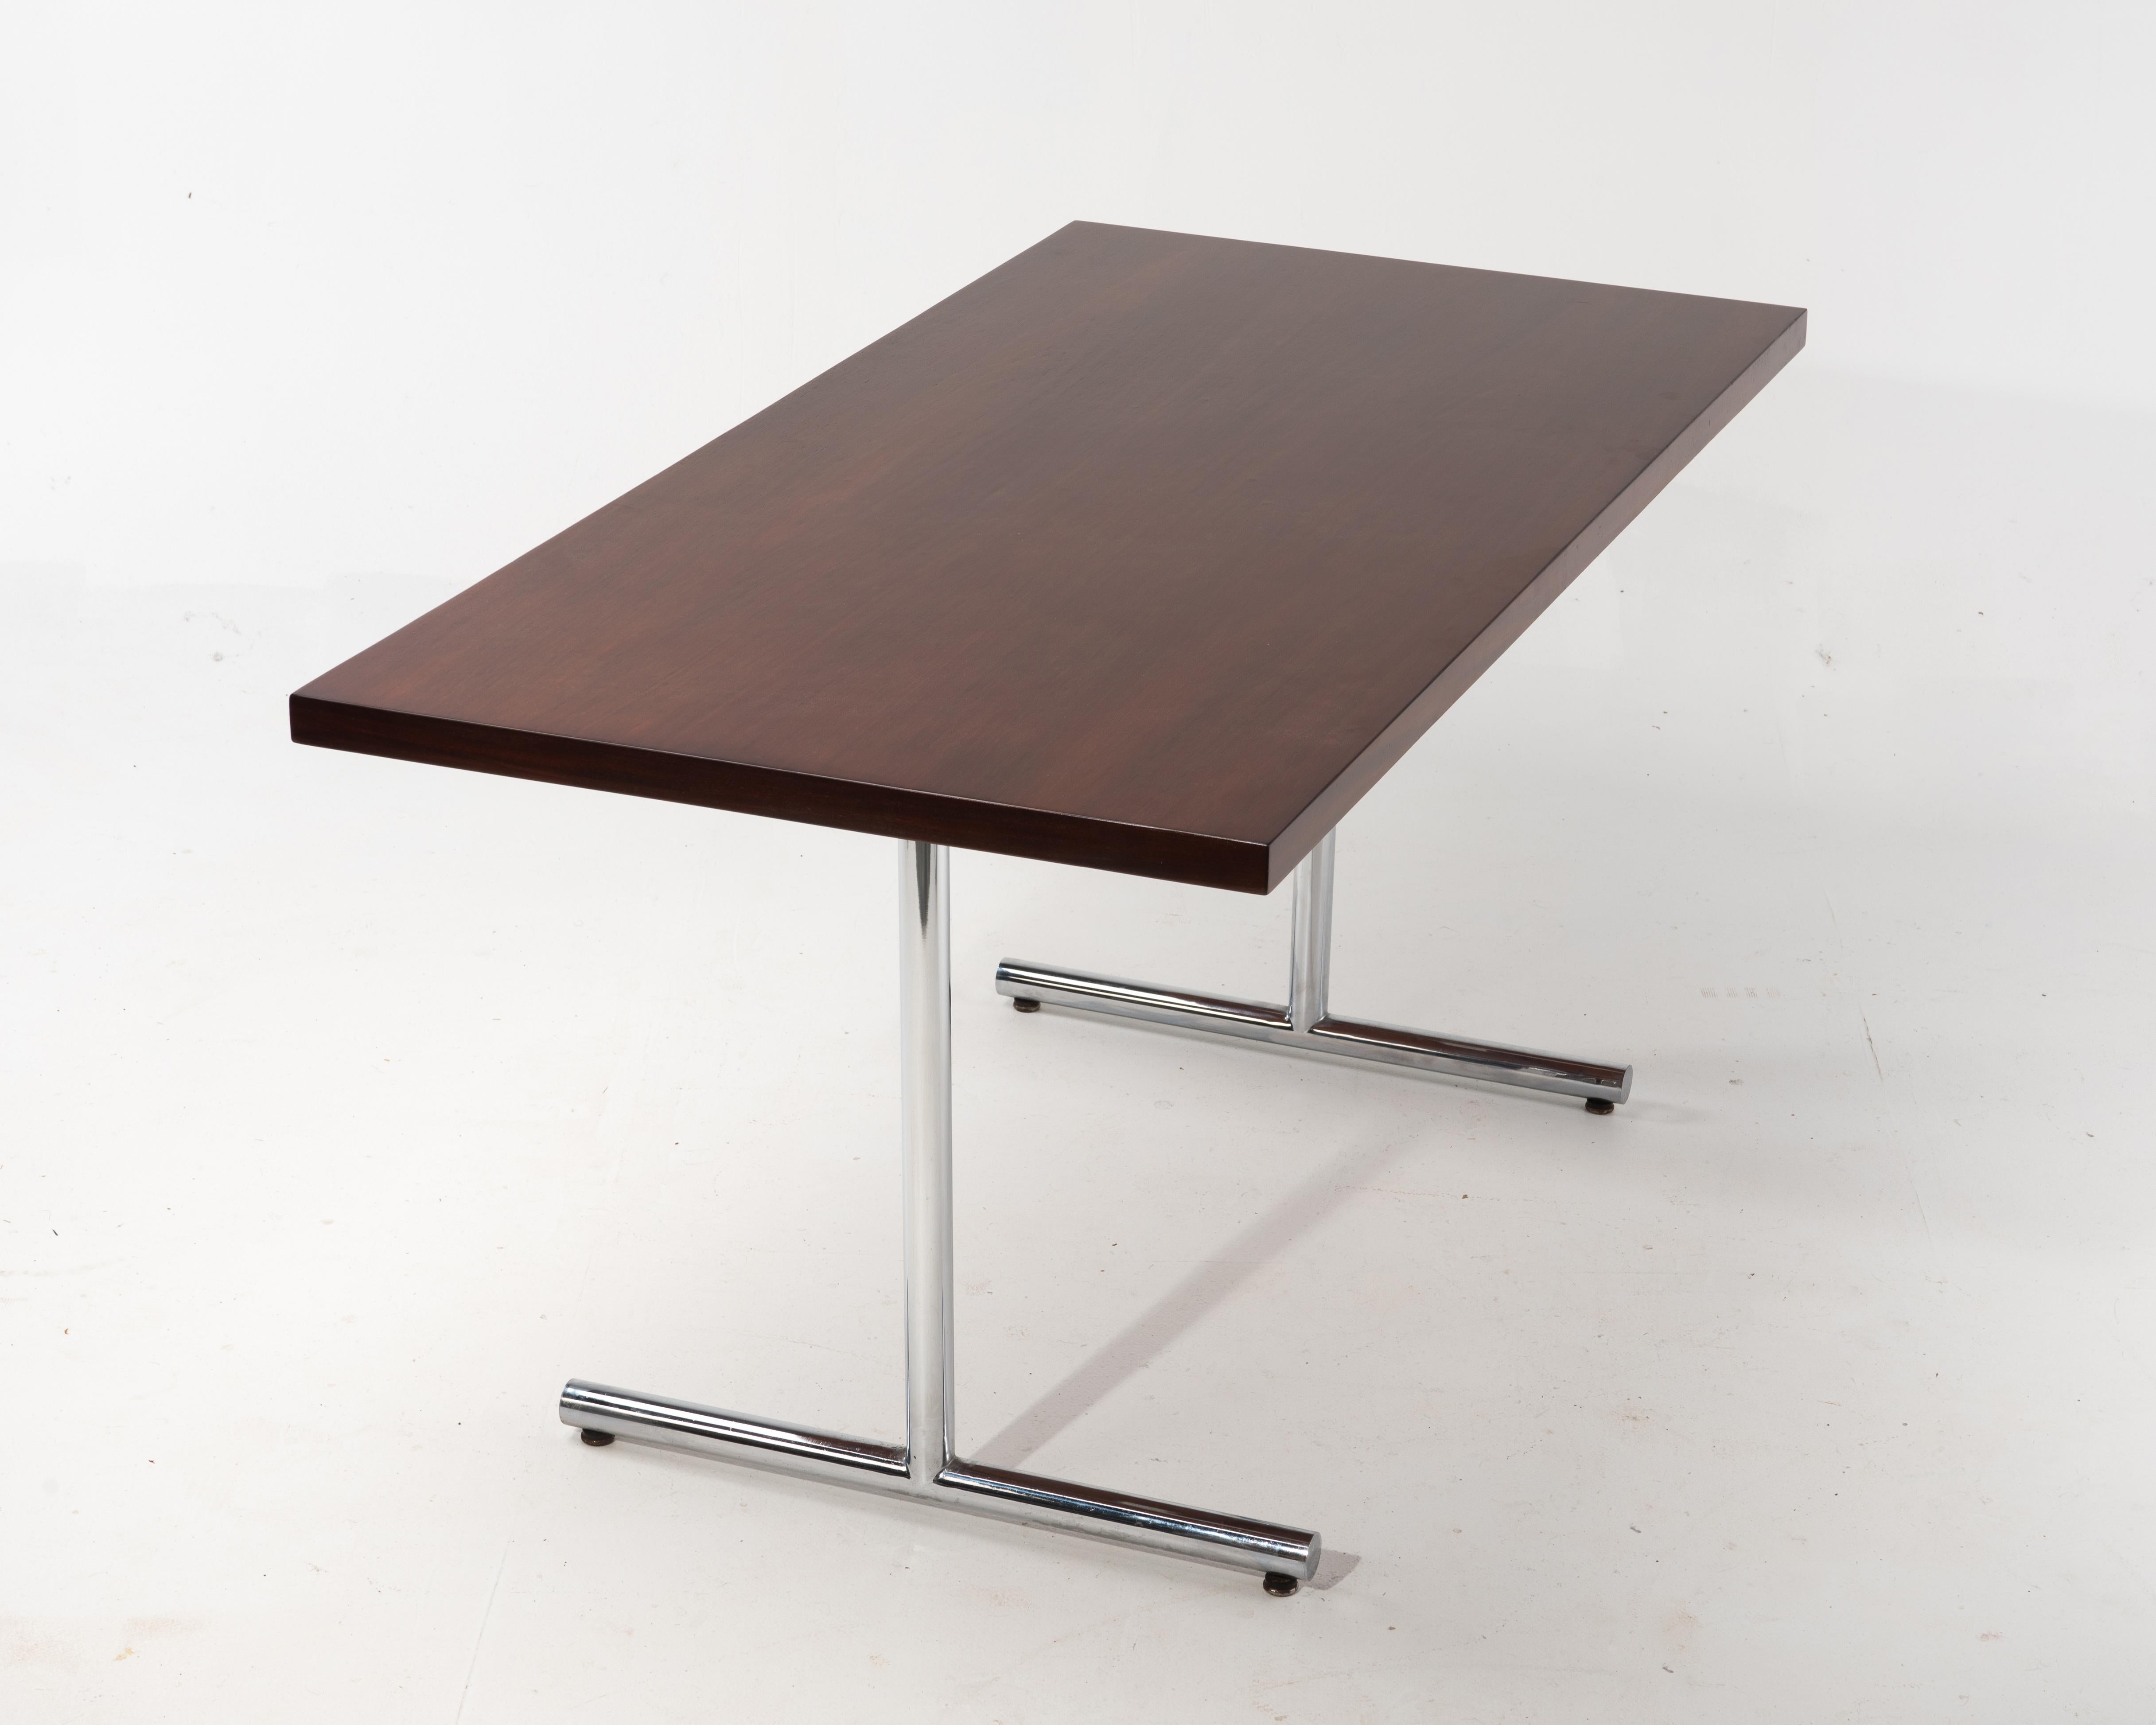 Late 20th Century 1970s Mid-Century Modern Rosewood Chrome Desk Dining Working Table